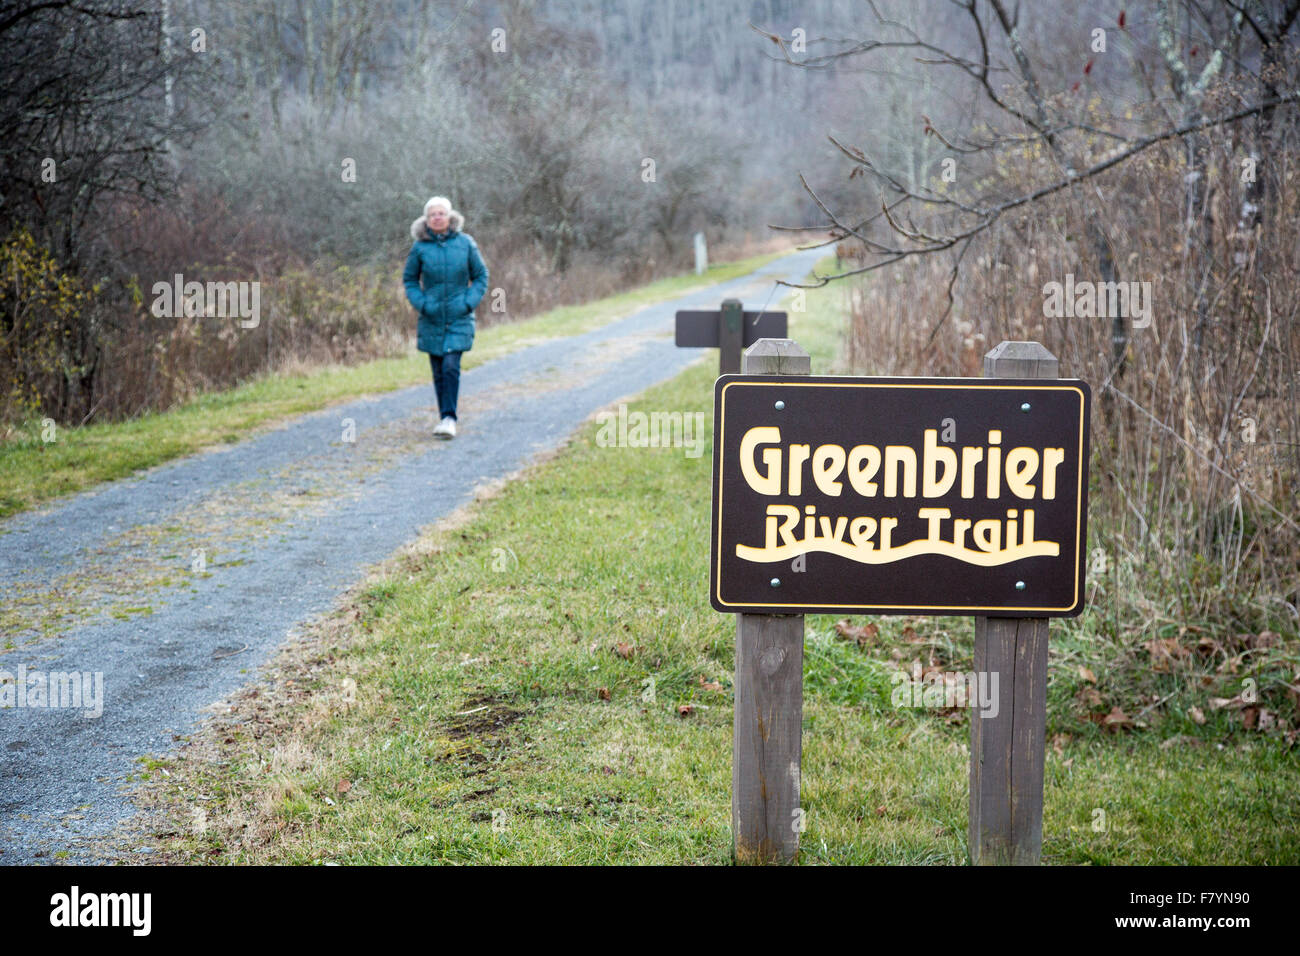 Cass, West Virginia - A woman hikes on the Greenbrier River Trail. Stock Photo